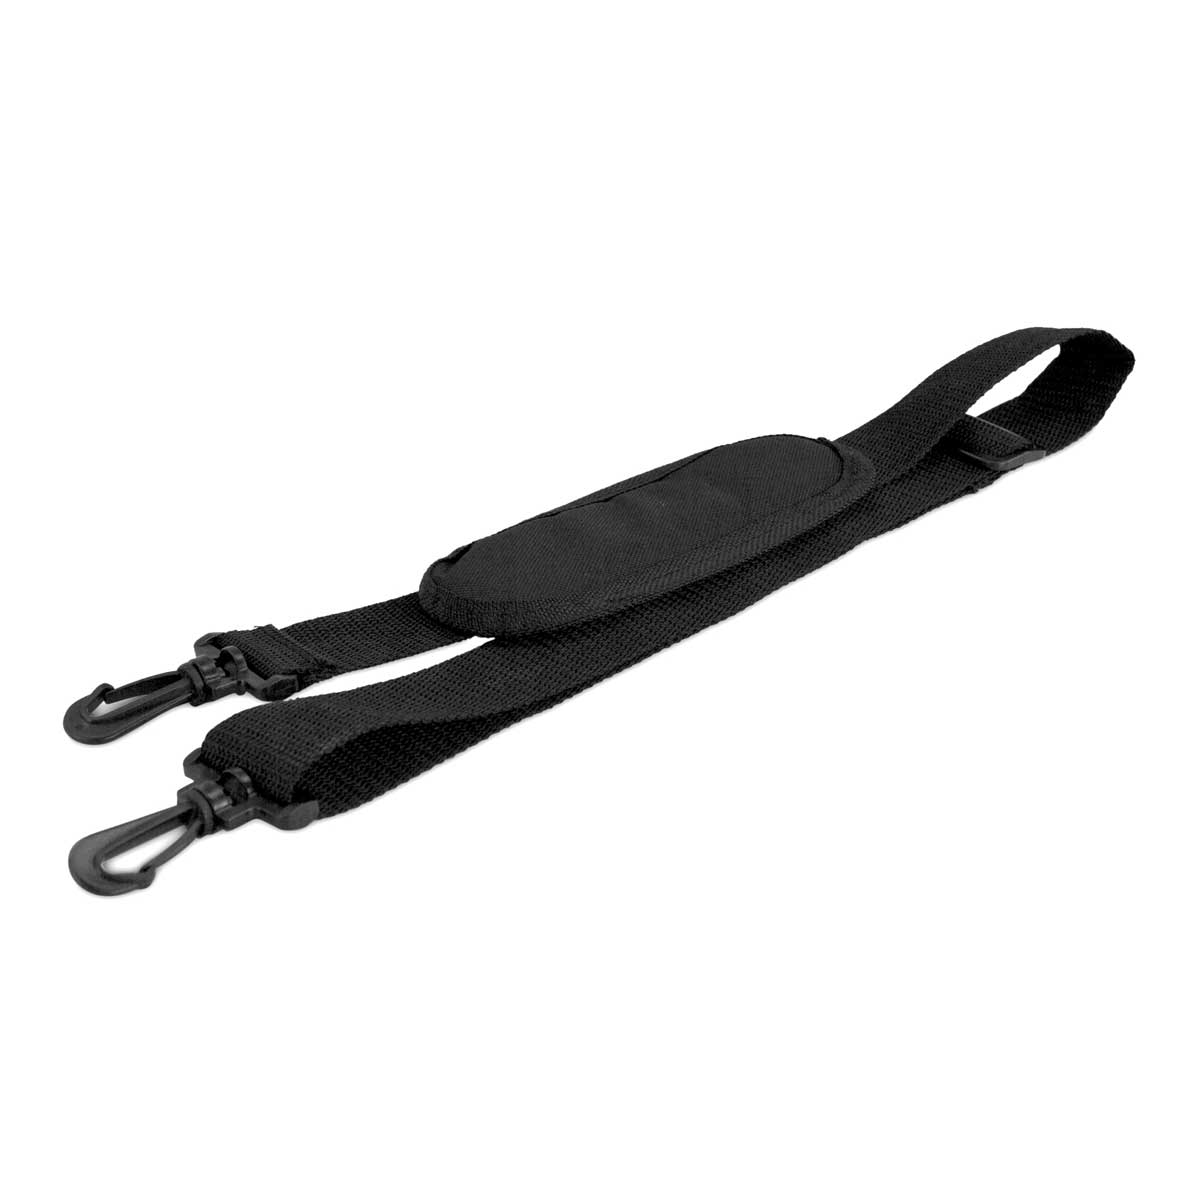 DALIX Premium Replacement Strap with Shoulder Pad for Laptop Travel Duffel Bags